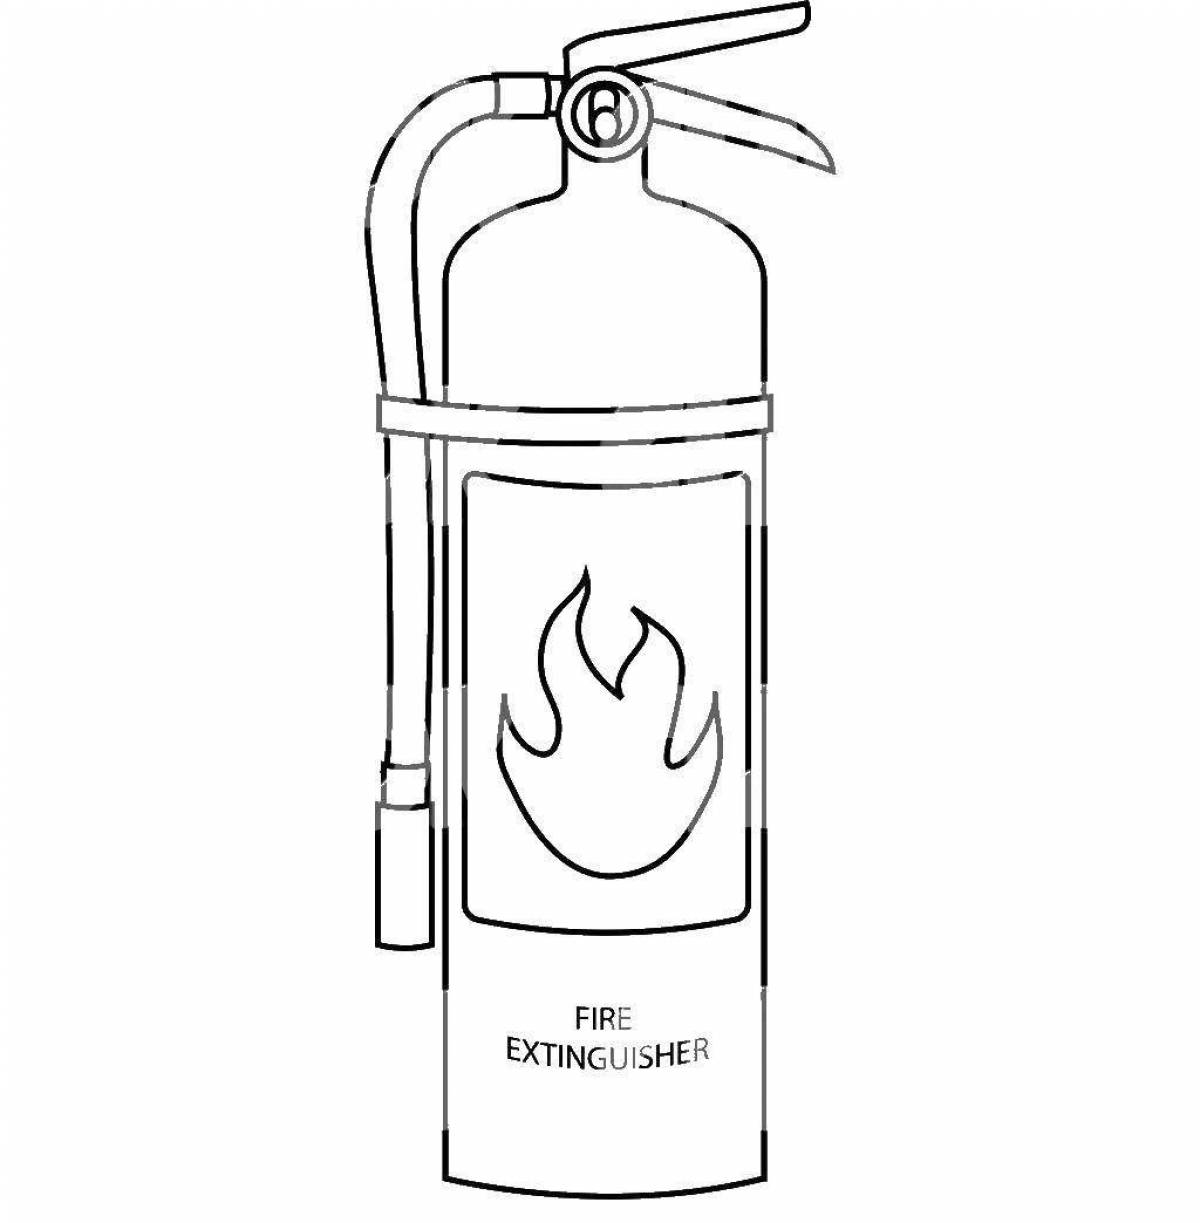 Fancy fire extinguisher coloring page